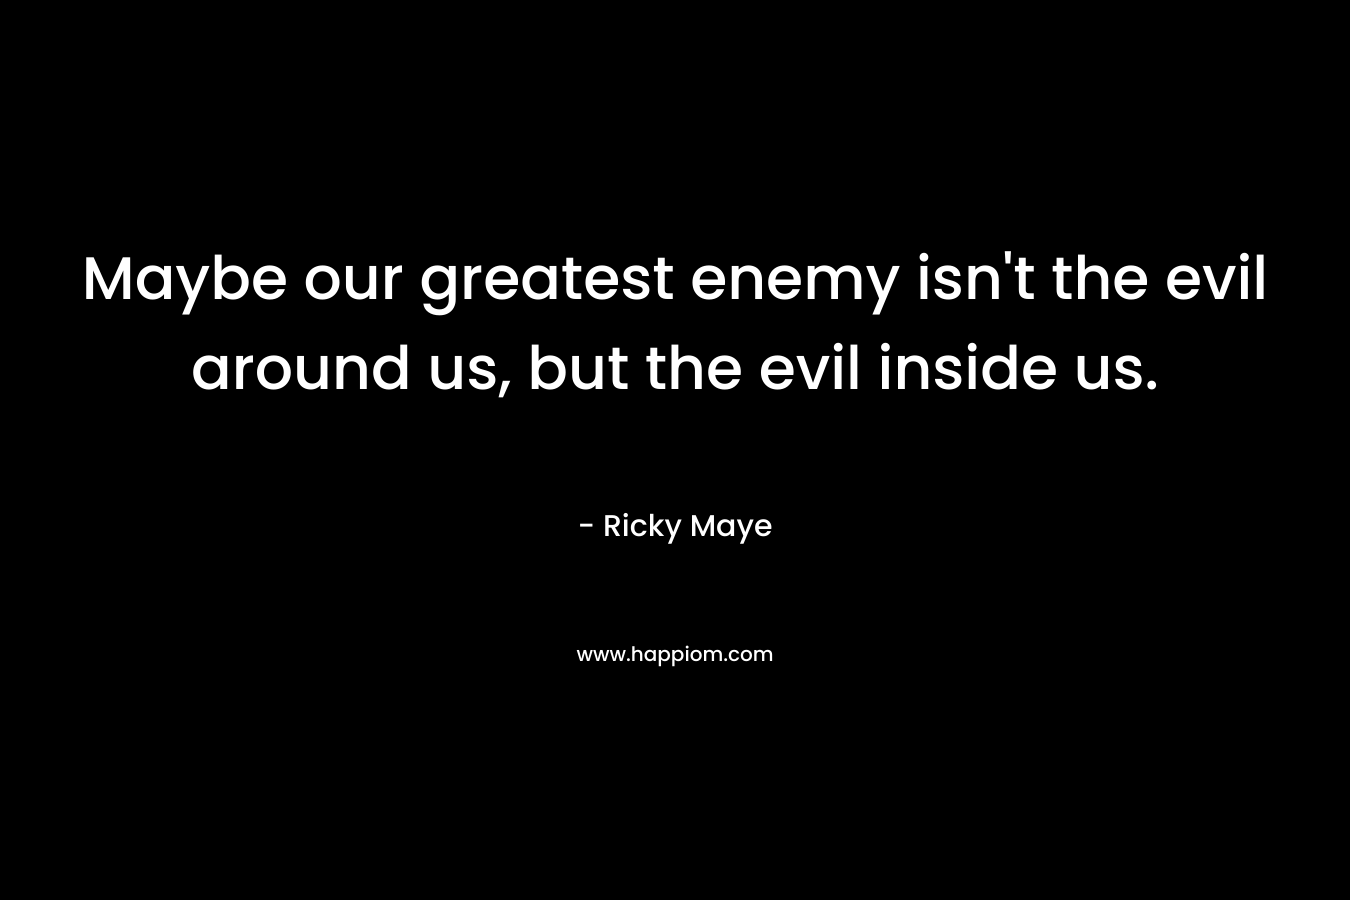 Maybe our greatest enemy isn’t the evil around us, but the evil inside us. – Ricky Maye